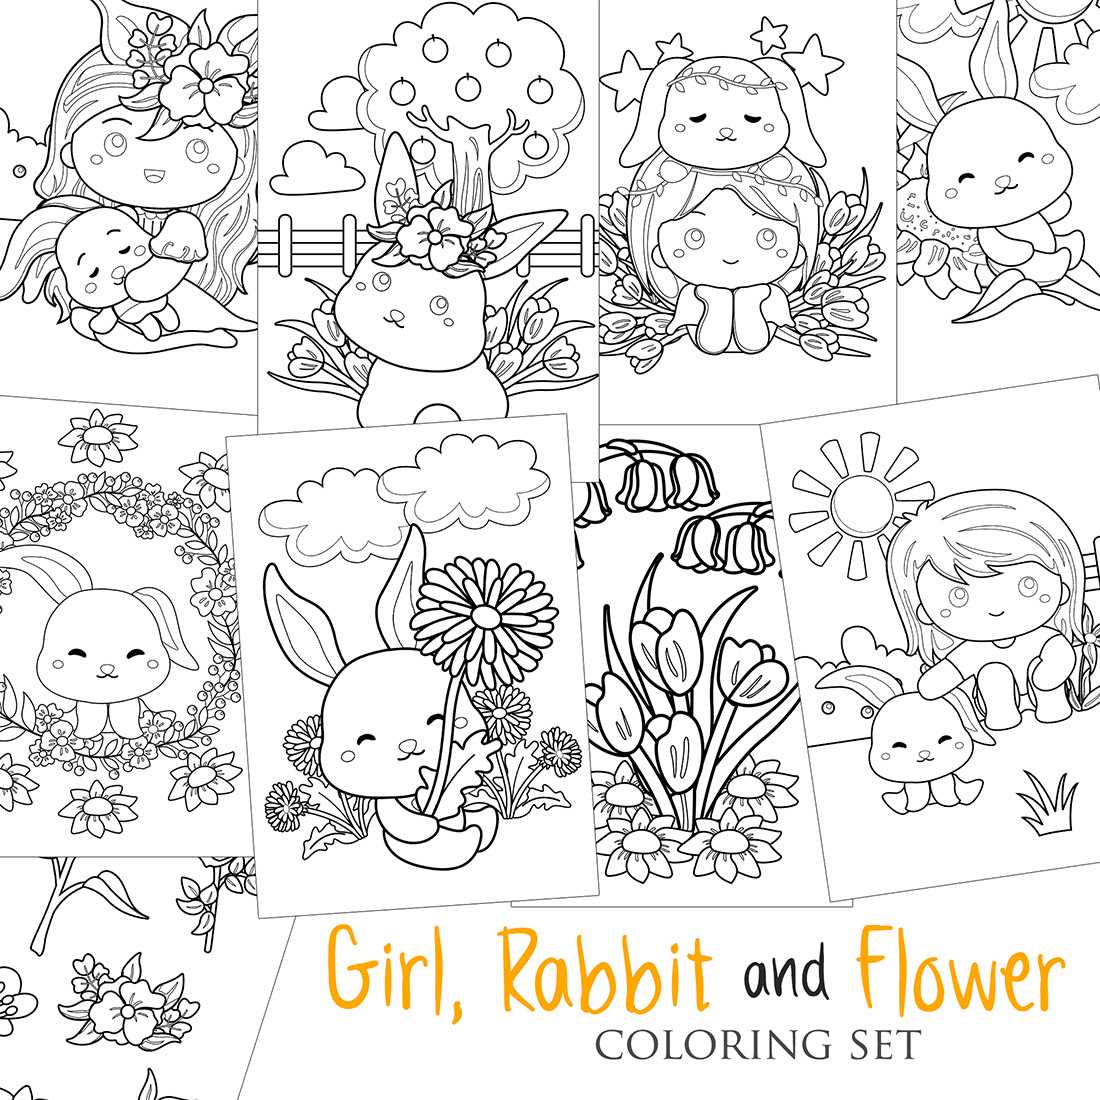 Girl Rabbit Flower Animal Cute Coloring Pages Activity For Kids And Adult cover image.